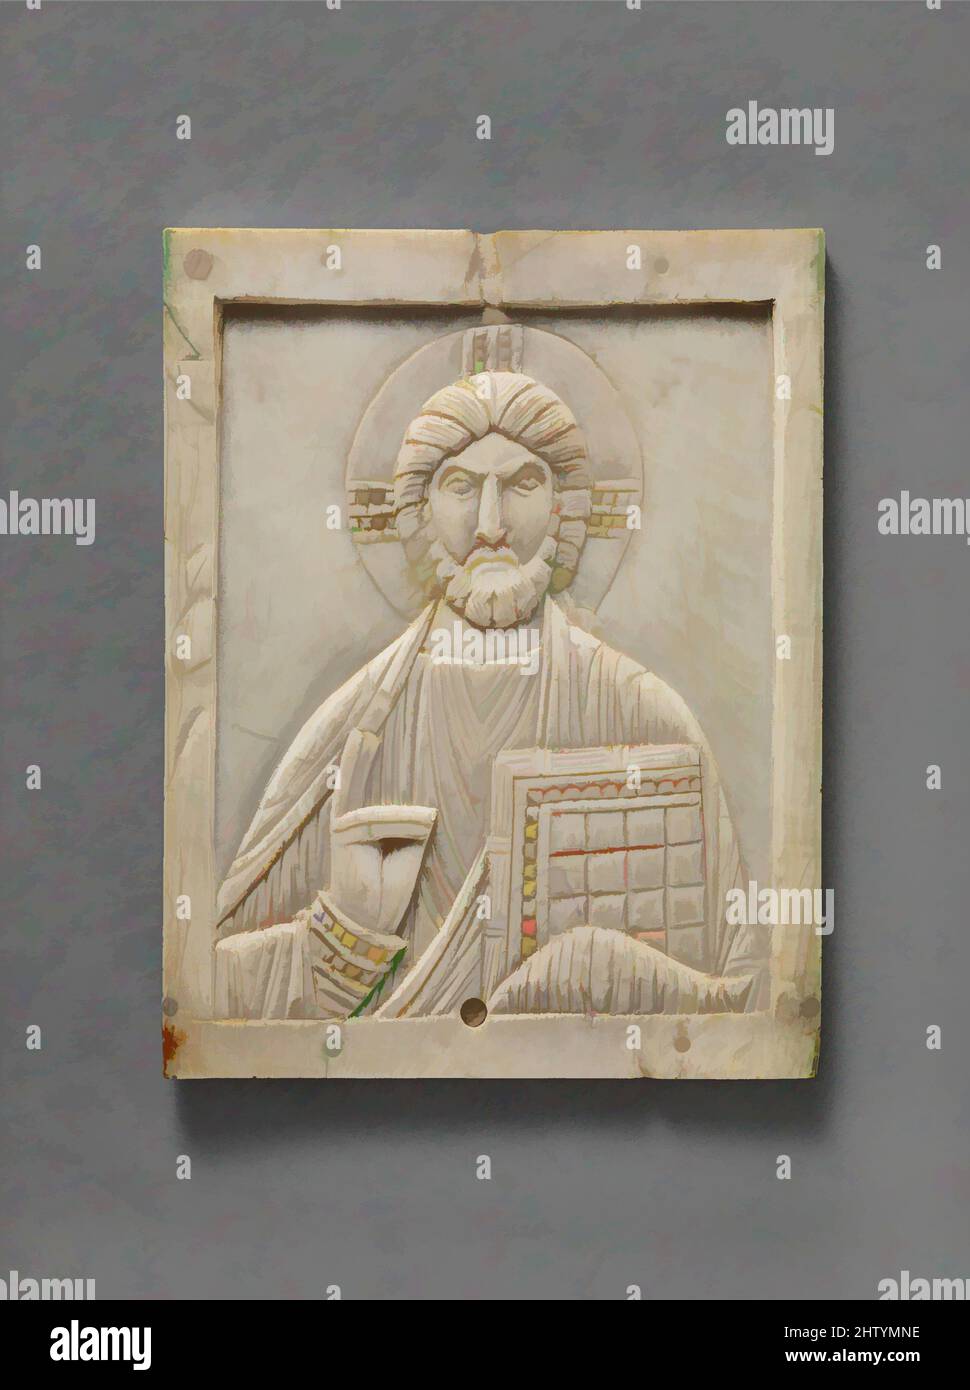 Art inspired by Icon with Christ Pantokrator, 11th–12th century, Byzantine, Ivory, Overall: 3 13/16 x 3 x 3/16 in. (9.7 x 7.6 x 0.4 cm), Ivories, The Byzantine image of Christ Pantokrator (Ruler of All) is a frontal, half-length portrait of a bearded Christ holding a Gospel book in his, Classic works modernized by Artotop with a splash of modernity. Shapes, color and value, eye-catching visual impact on art. Emotions through freedom of artworks in a contemporary way. A timeless message pursuing a wildly creative new direction. Artists turning to the digital medium and creating the Artotop NFT Stock Photo